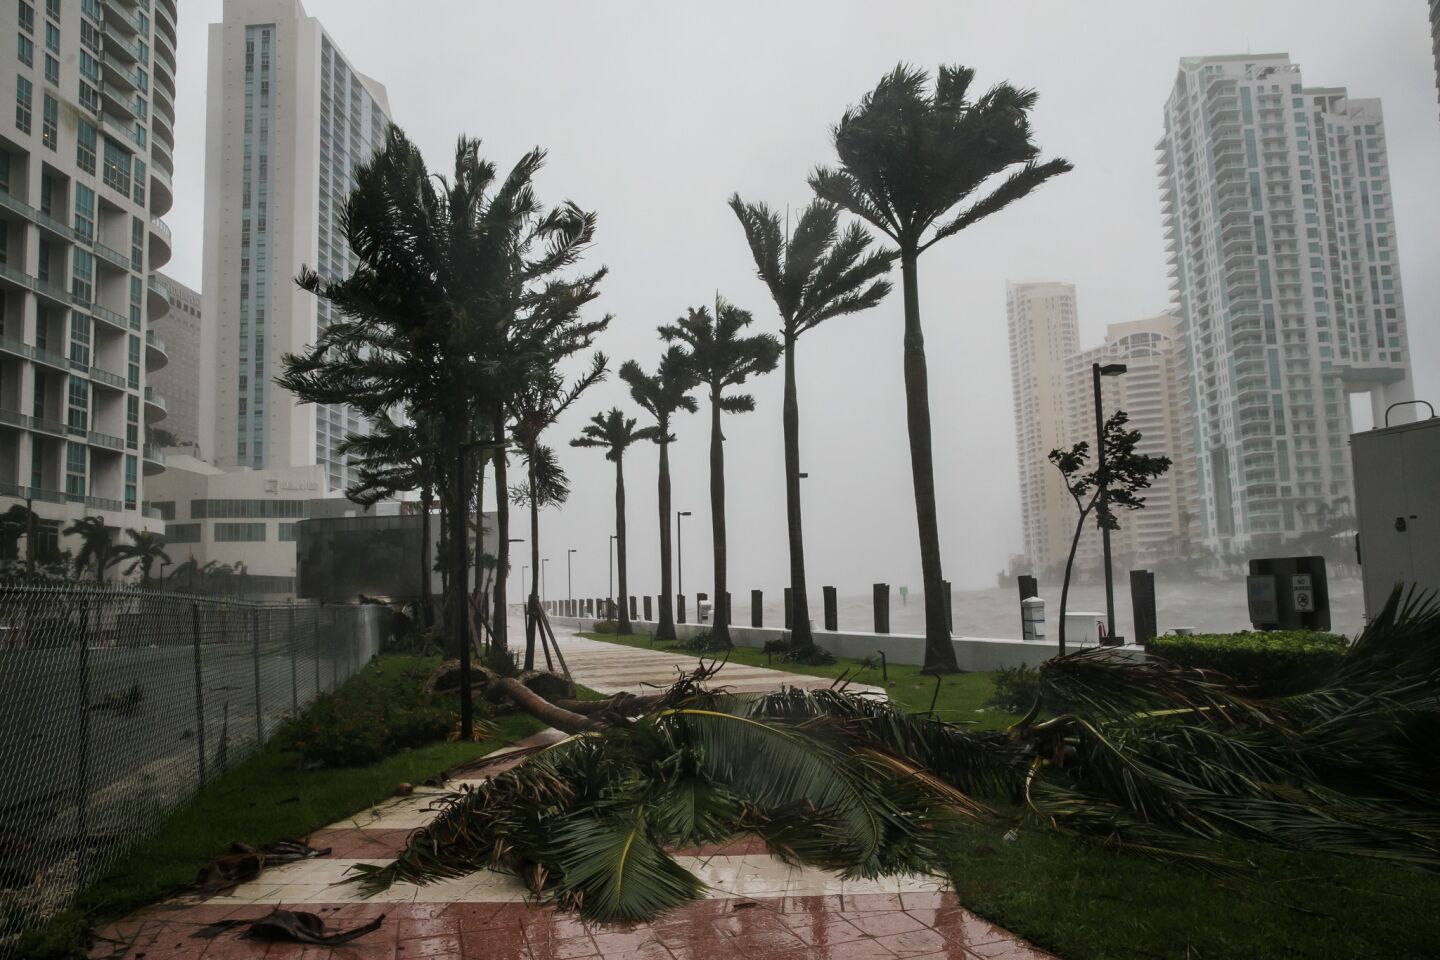 Trees fall as winds pick up speed early Sunday as Hurricane Irma approaches Miami.